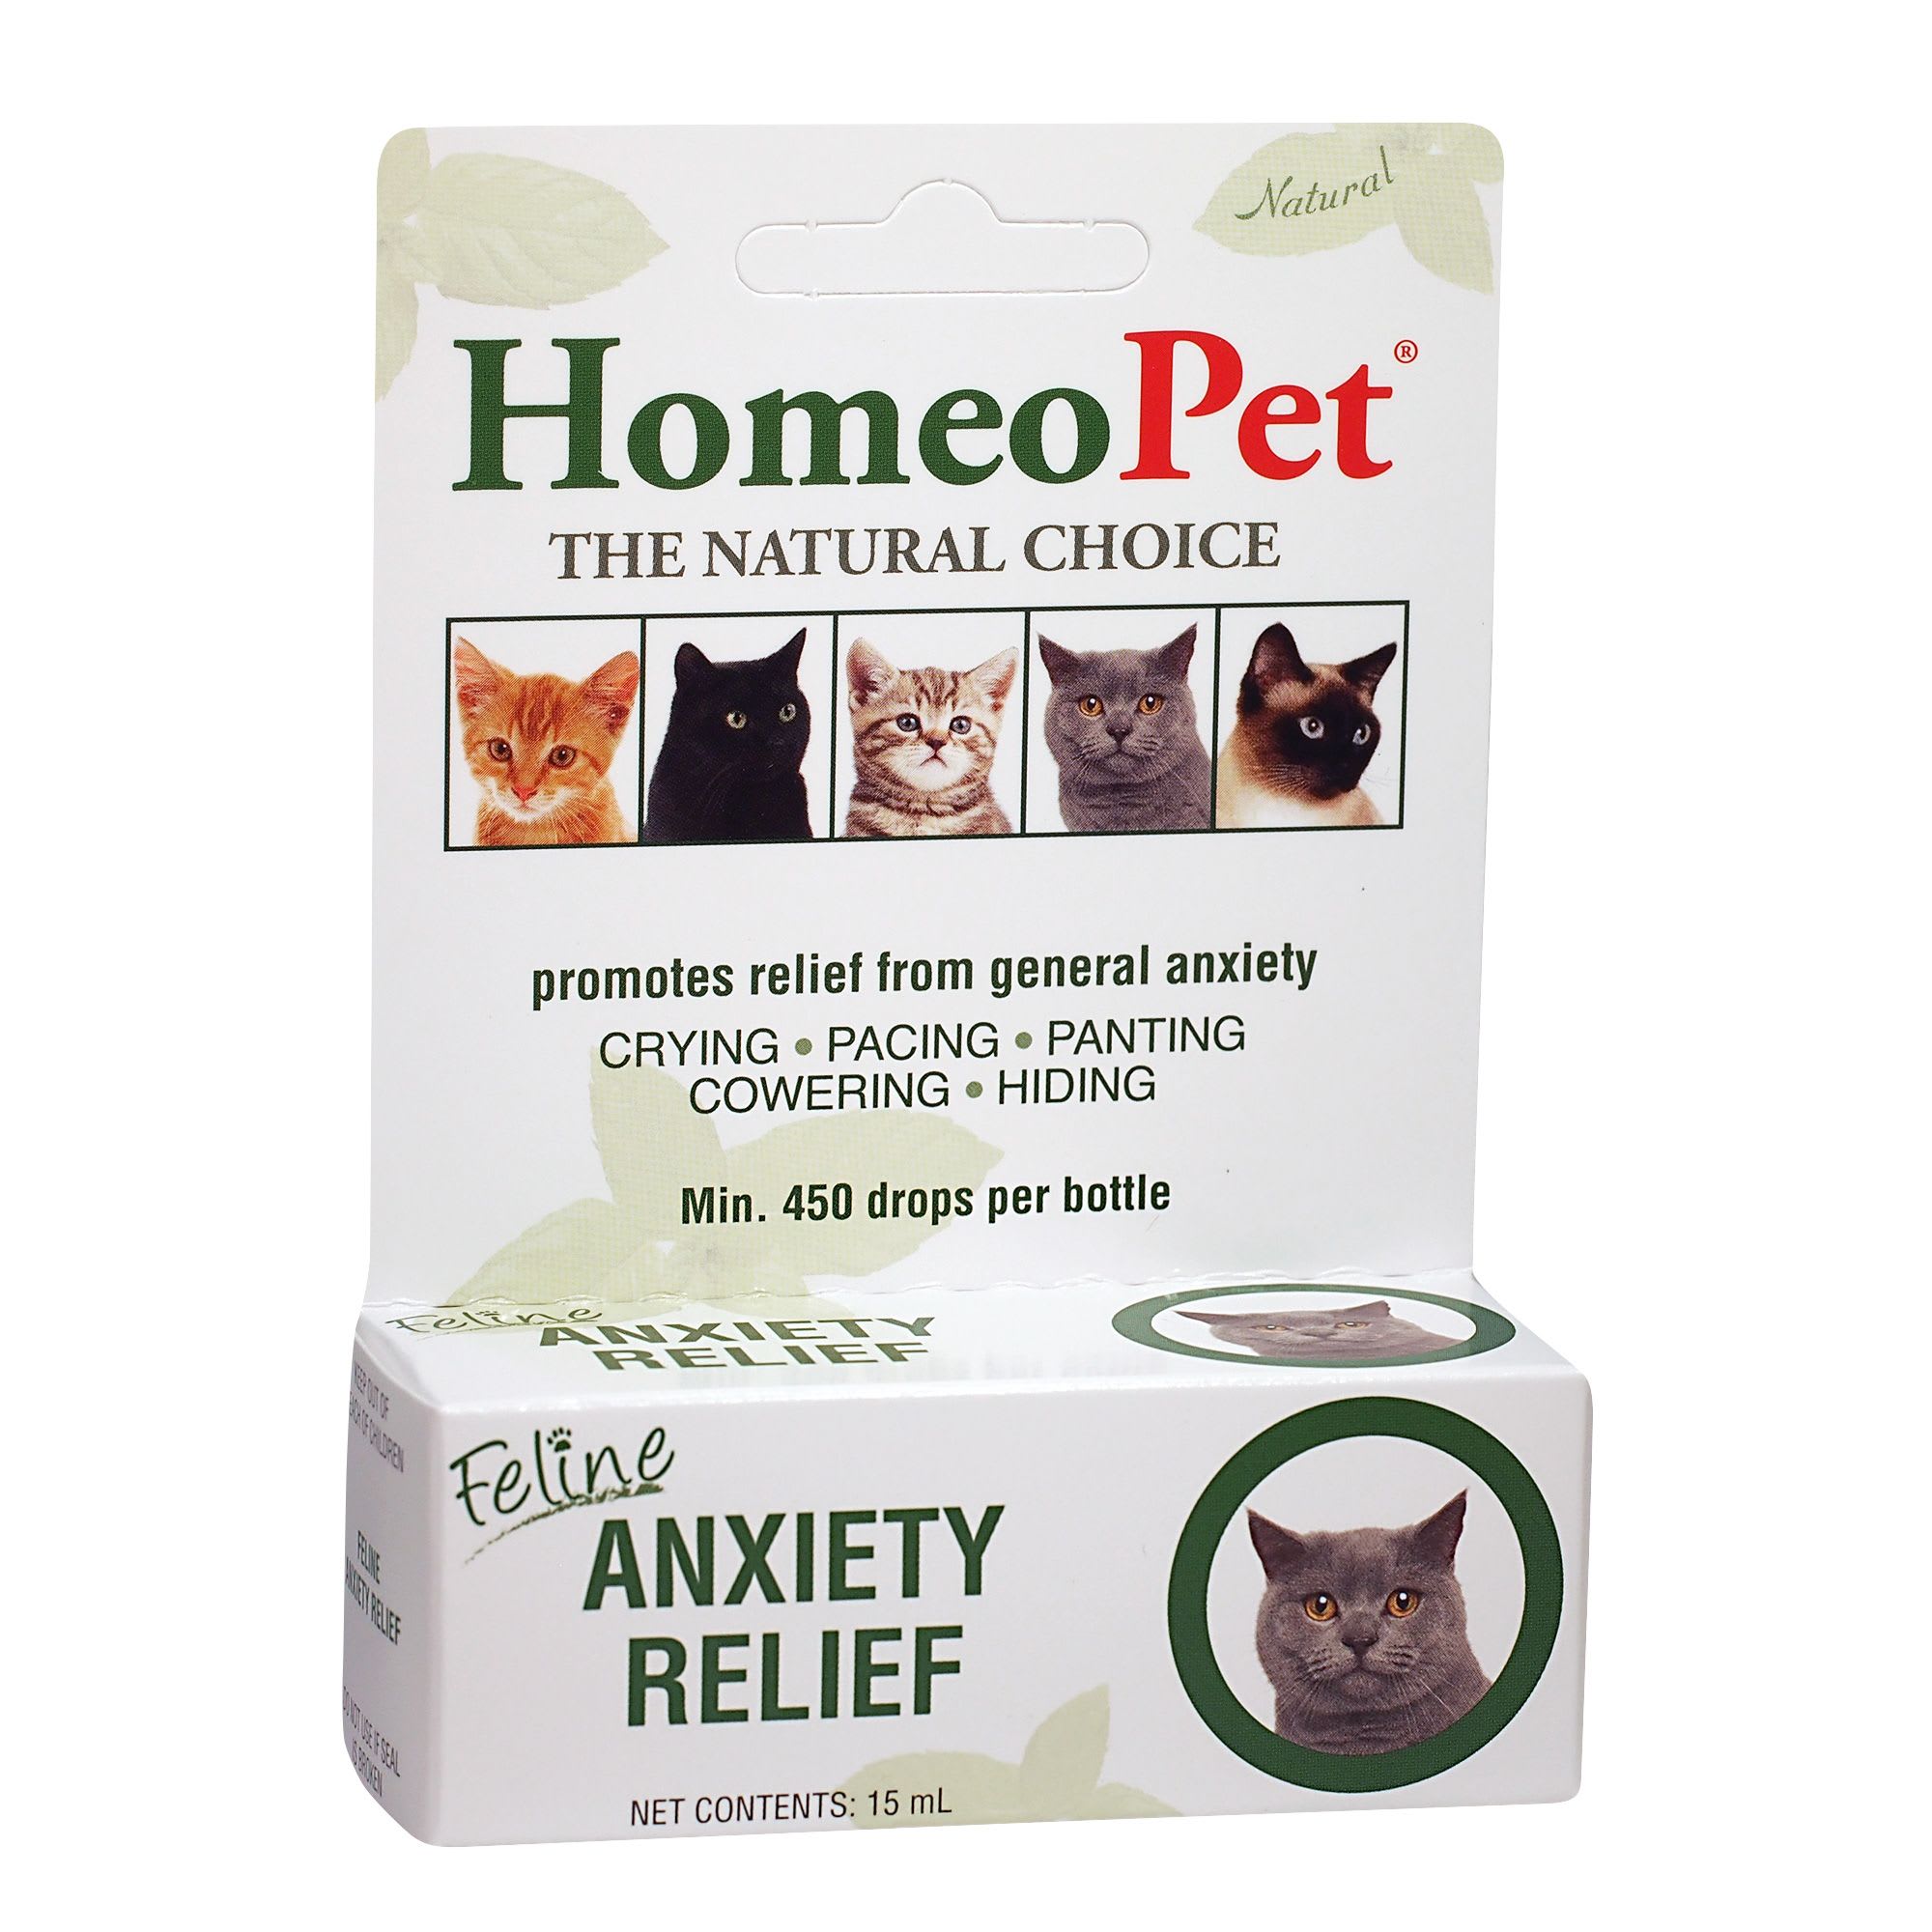 UPC 704959047313 product image for HomeoPet Feline Anxiety Relief for Cats, 0.51 oz. | upcitemdb.com